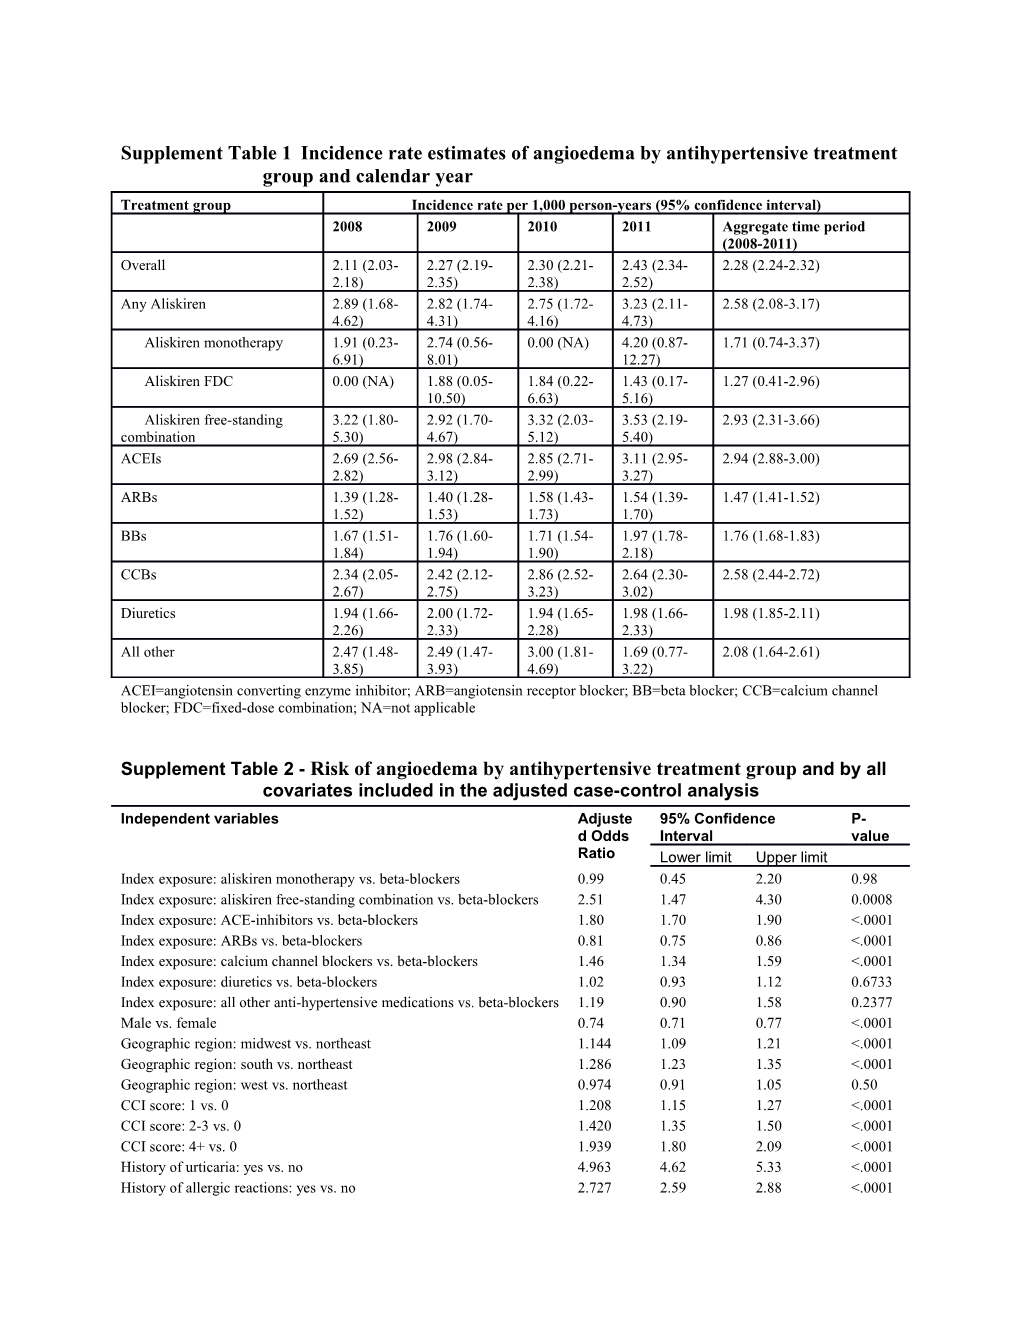 Supplement Table 1Incidence Rate Estimates of Angioedema by Antihypertensive Treatment